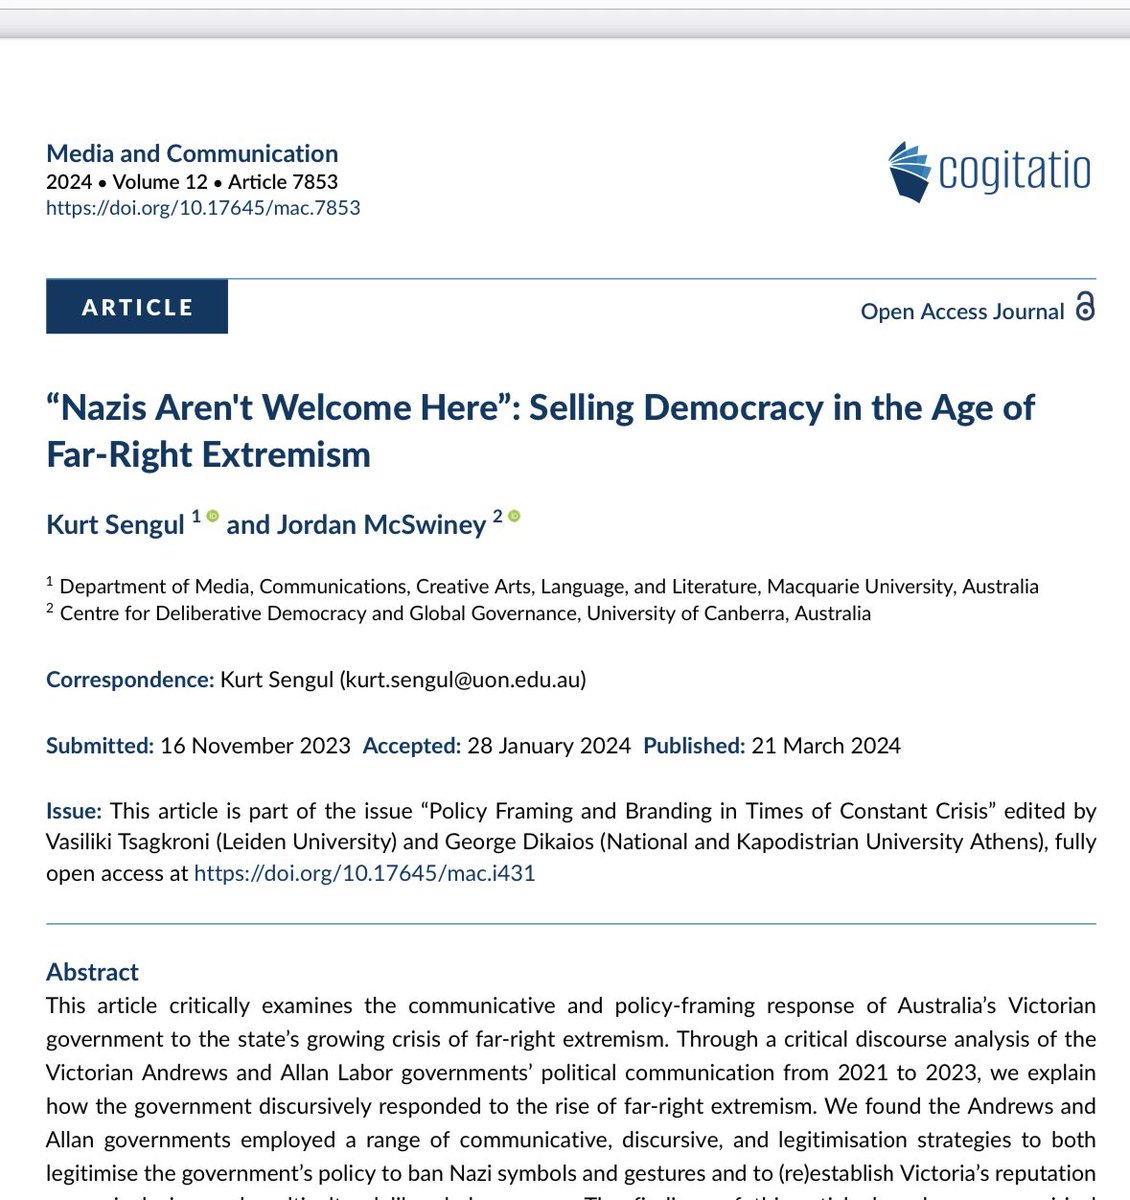 🚨 New article (🔓 access) Thrilled to see this bad boy out in @CogitatioMaC. Jordan and I examine the Victorian government’s response to the state’s RW extremism crisis: “Nazis aren’t welcome here”: selling democracy in the age of far-right extremism cogitatiopress.com/mediaandcommun…